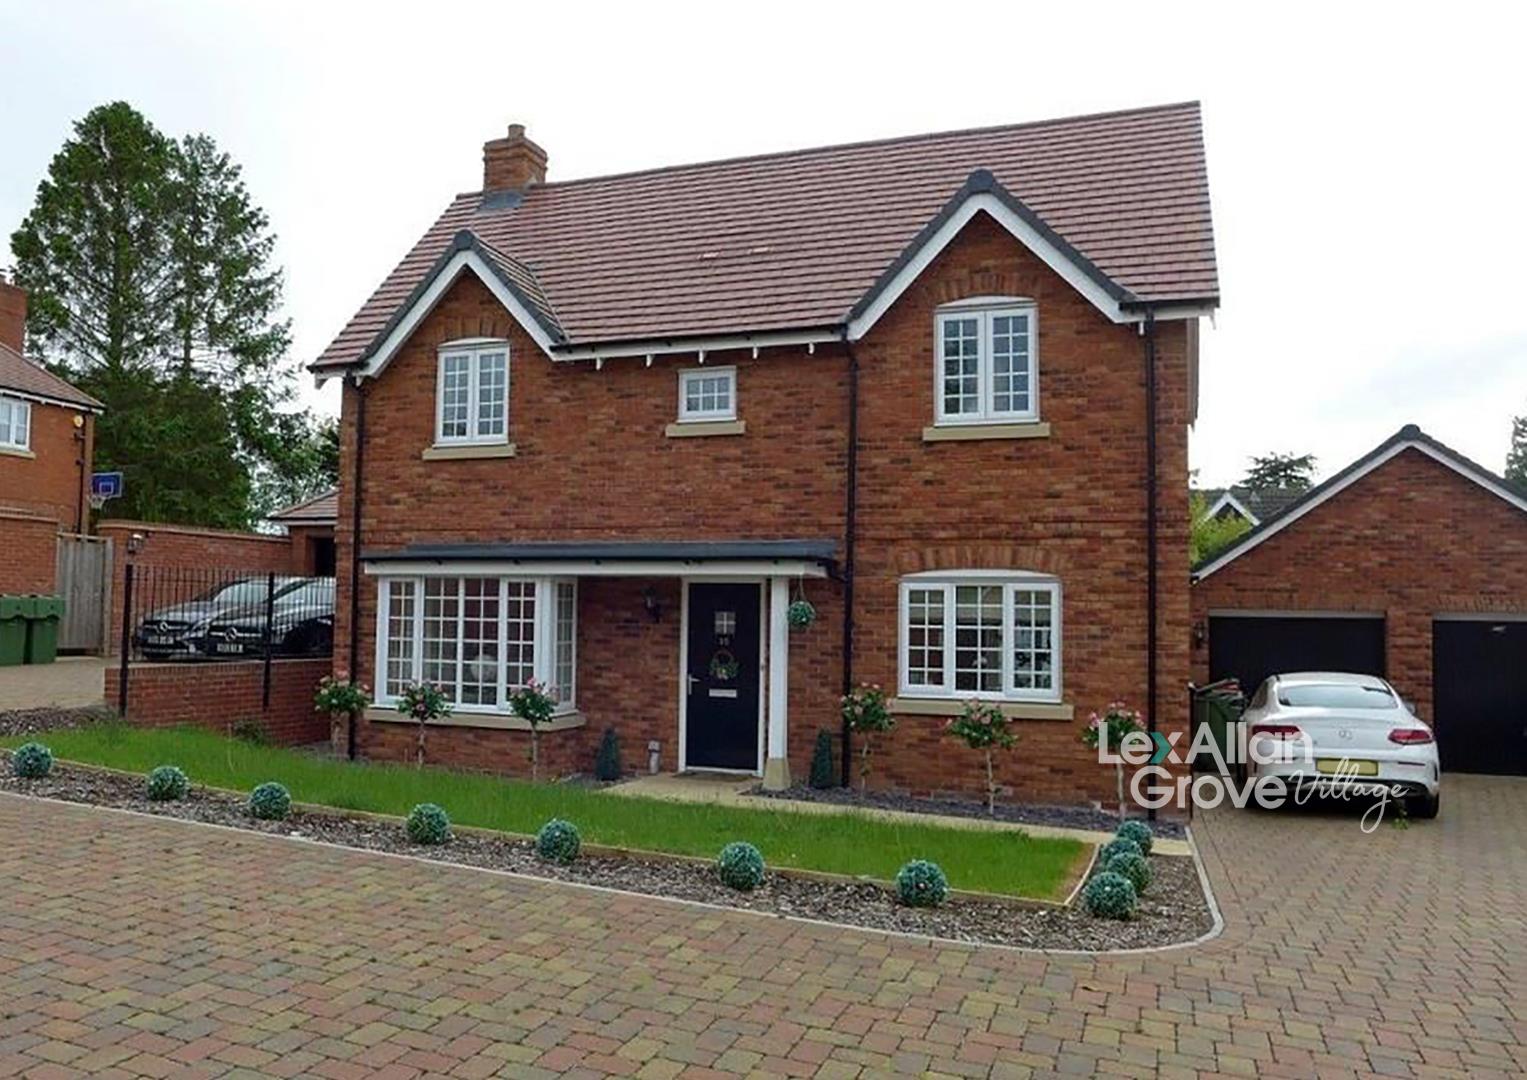 3 bed  for sale in Amphlett Close, Stourbridge, DY9 